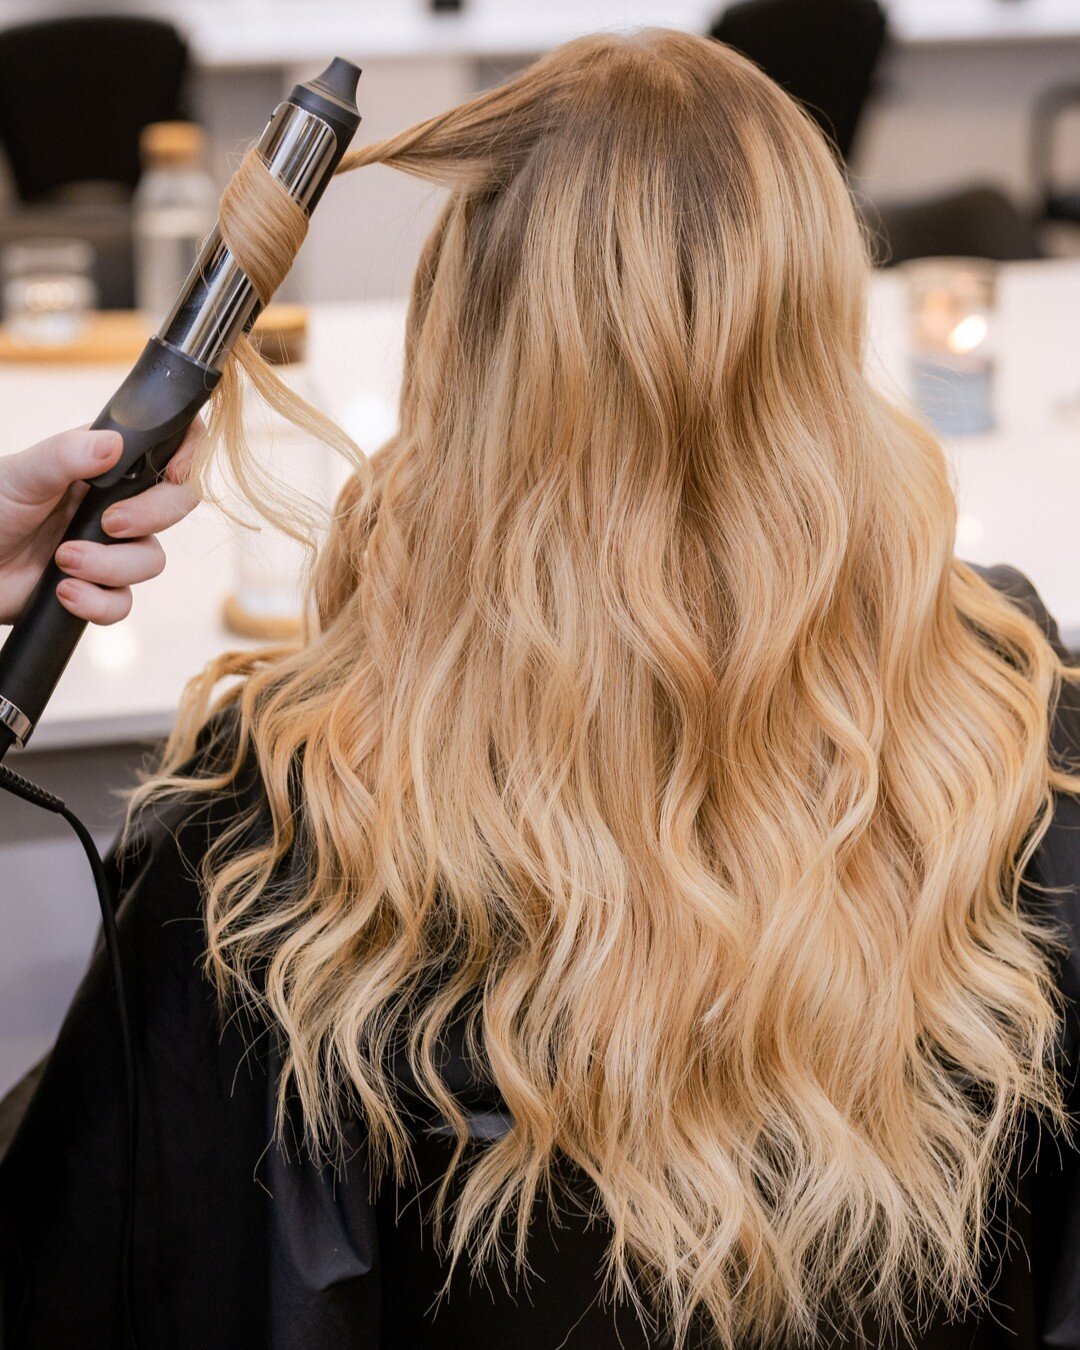 The perfect touseled curl ⠀⠀⠀⠀⠀⠀⠀⠀⠀
Our experienced hair stylists can ensure these amazing curls are achieved time and time again, plus they last! ⠀⠀⠀⠀⠀⠀⠀⠀⠀
⠀⠀⠀⠀⠀⠀⠀⠀⠀
⠀⠀⠀⠀⠀⠀⠀⠀⠀
#earthwindfirehair